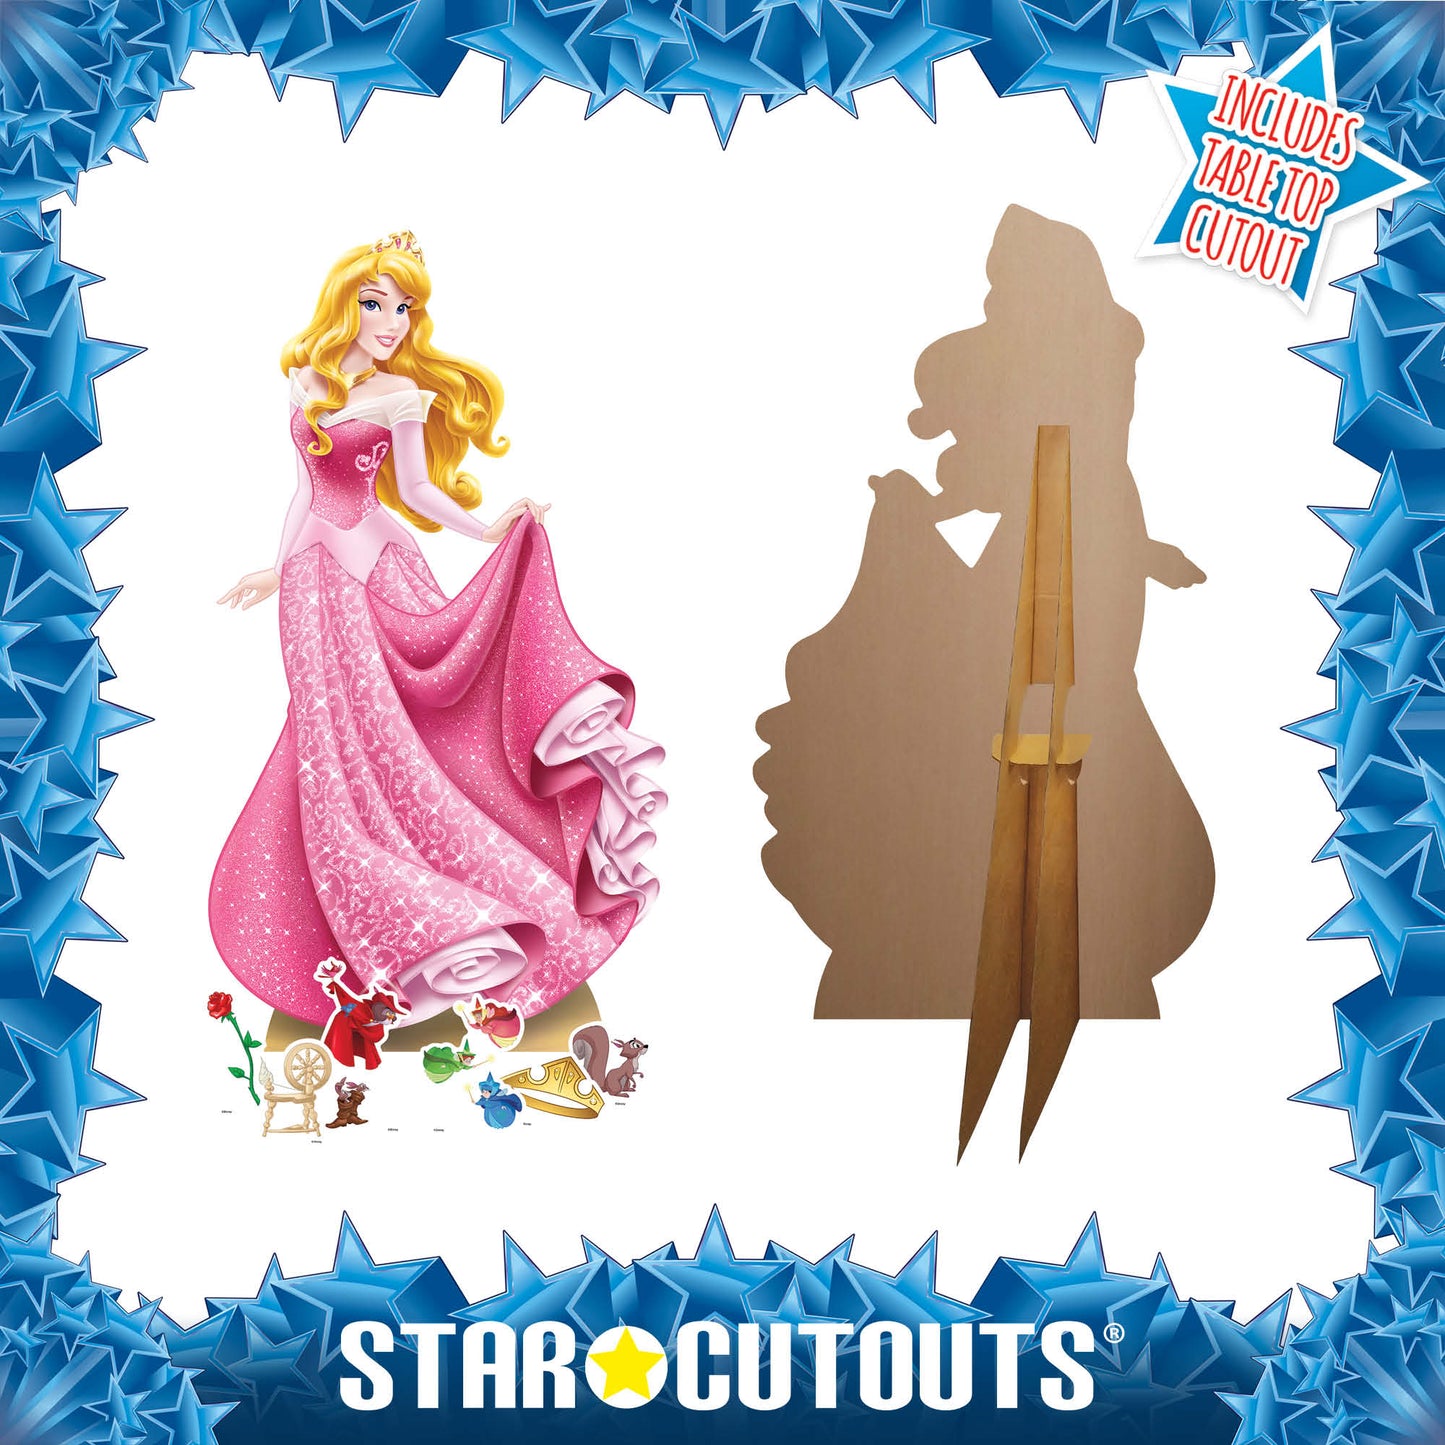 SP009 Aurora Sleeping Beauty Cardboard Cutout Party Decorations With Six Mini Party Supplies Height 134cm